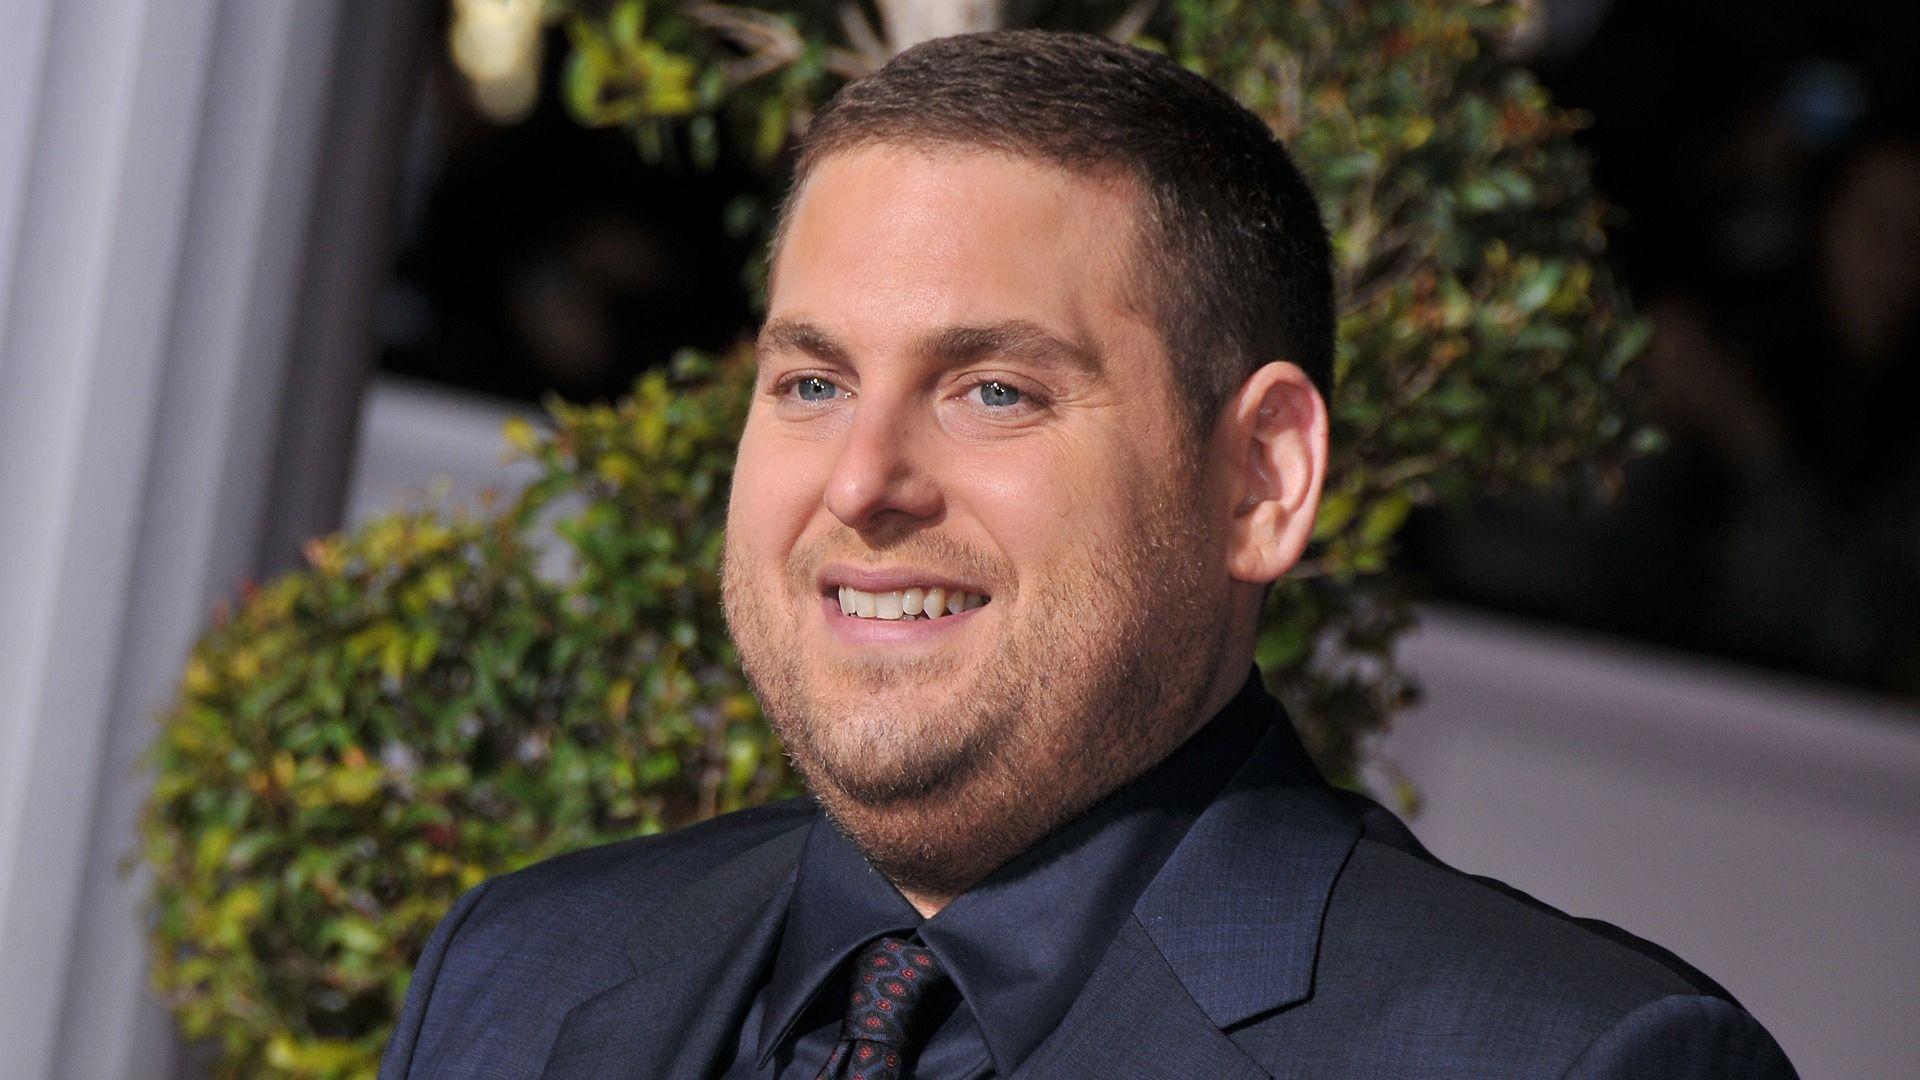 Download wallpaper 1920x1080 jonah hill, actor, smile HD background